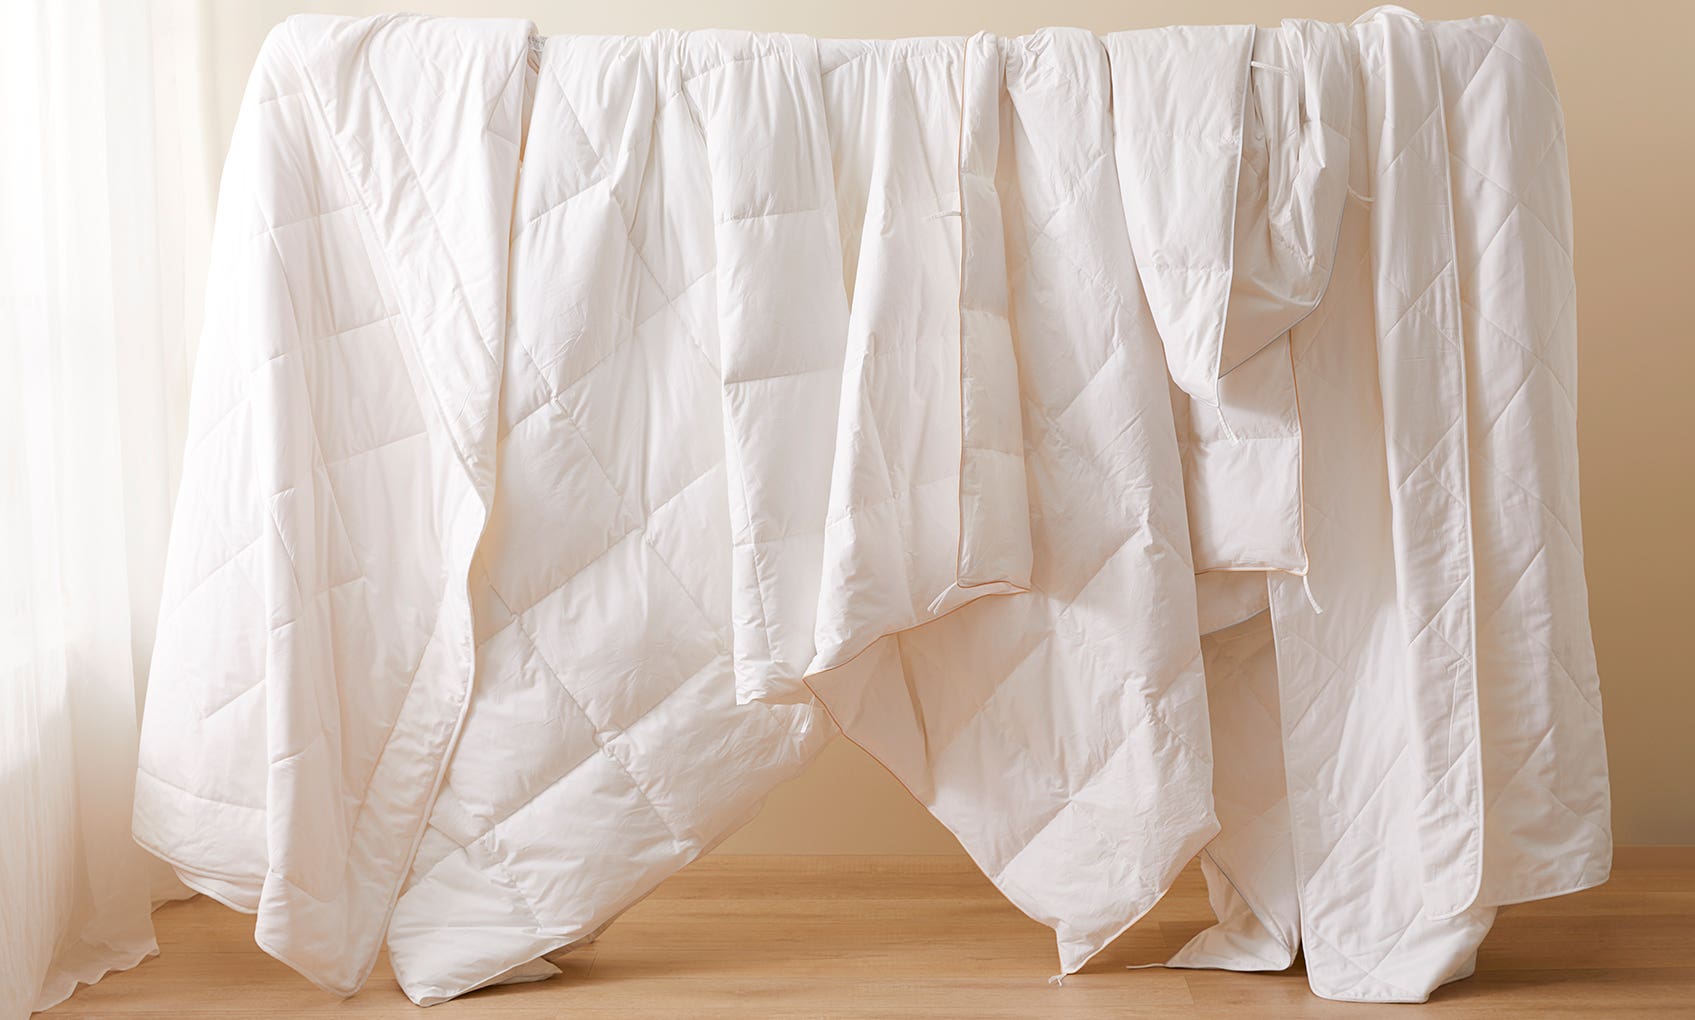 How to Choose the Right Duvet